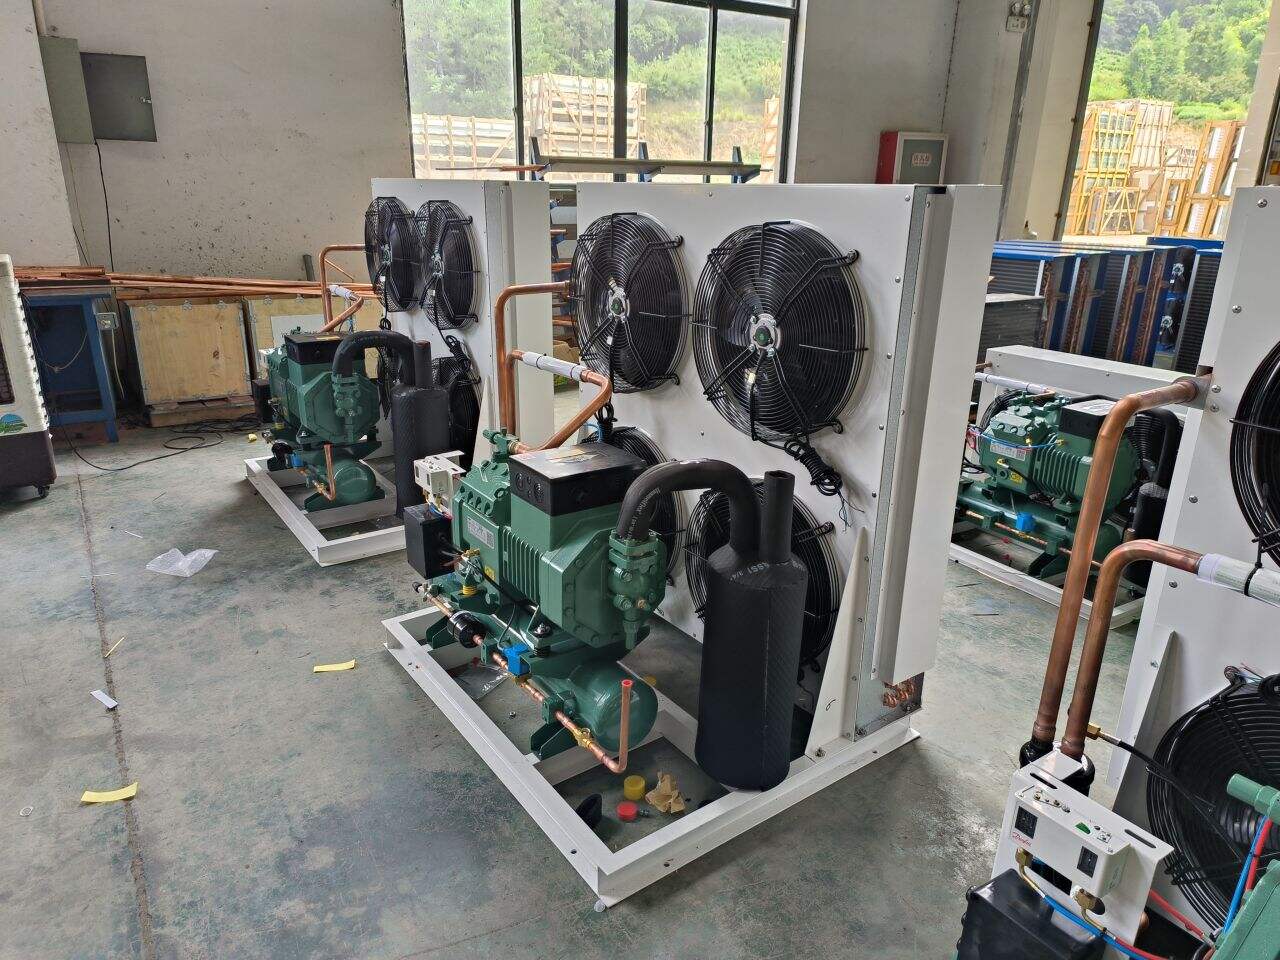 How to Use Air Condensing Units?